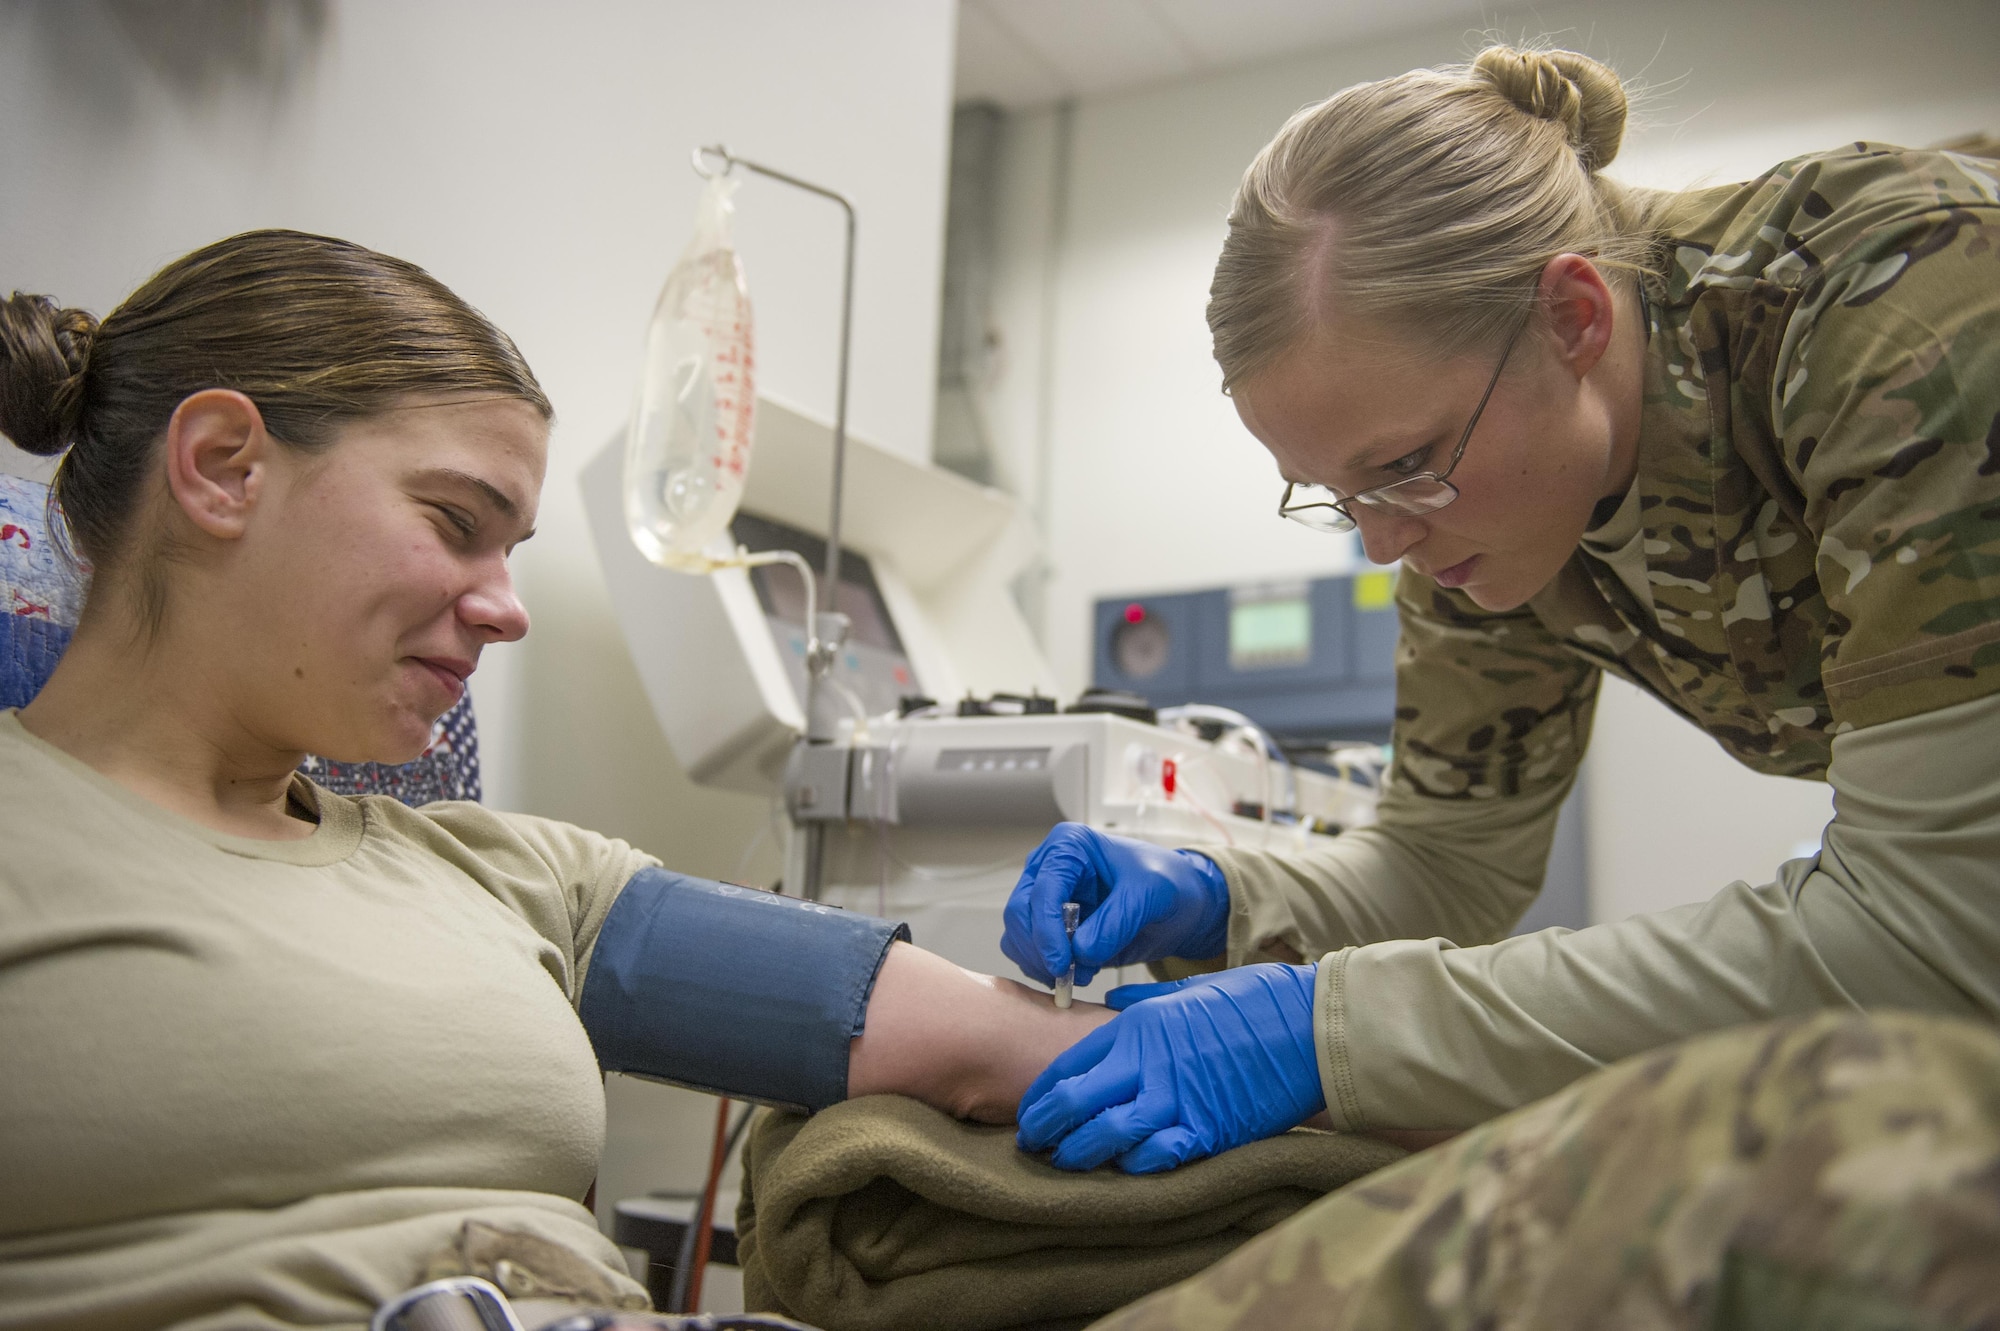 Spc. Lauren O'Neal, 153rd Blood Support Detachment medical laboratory technician, prepares Spc. Samantha Criscio, Guard Force, to give platelets at Craig Joint Theater Hospital on Bagram Airfield, Afghanistan, Dec. 31, 2015. In order to extract platelets, a critical life-saving blood component, apherisis machines are used to draw blood and return the unused portions to the donor. (U.S. Air Force photo/Tech. Sgt. Robert Cloys)